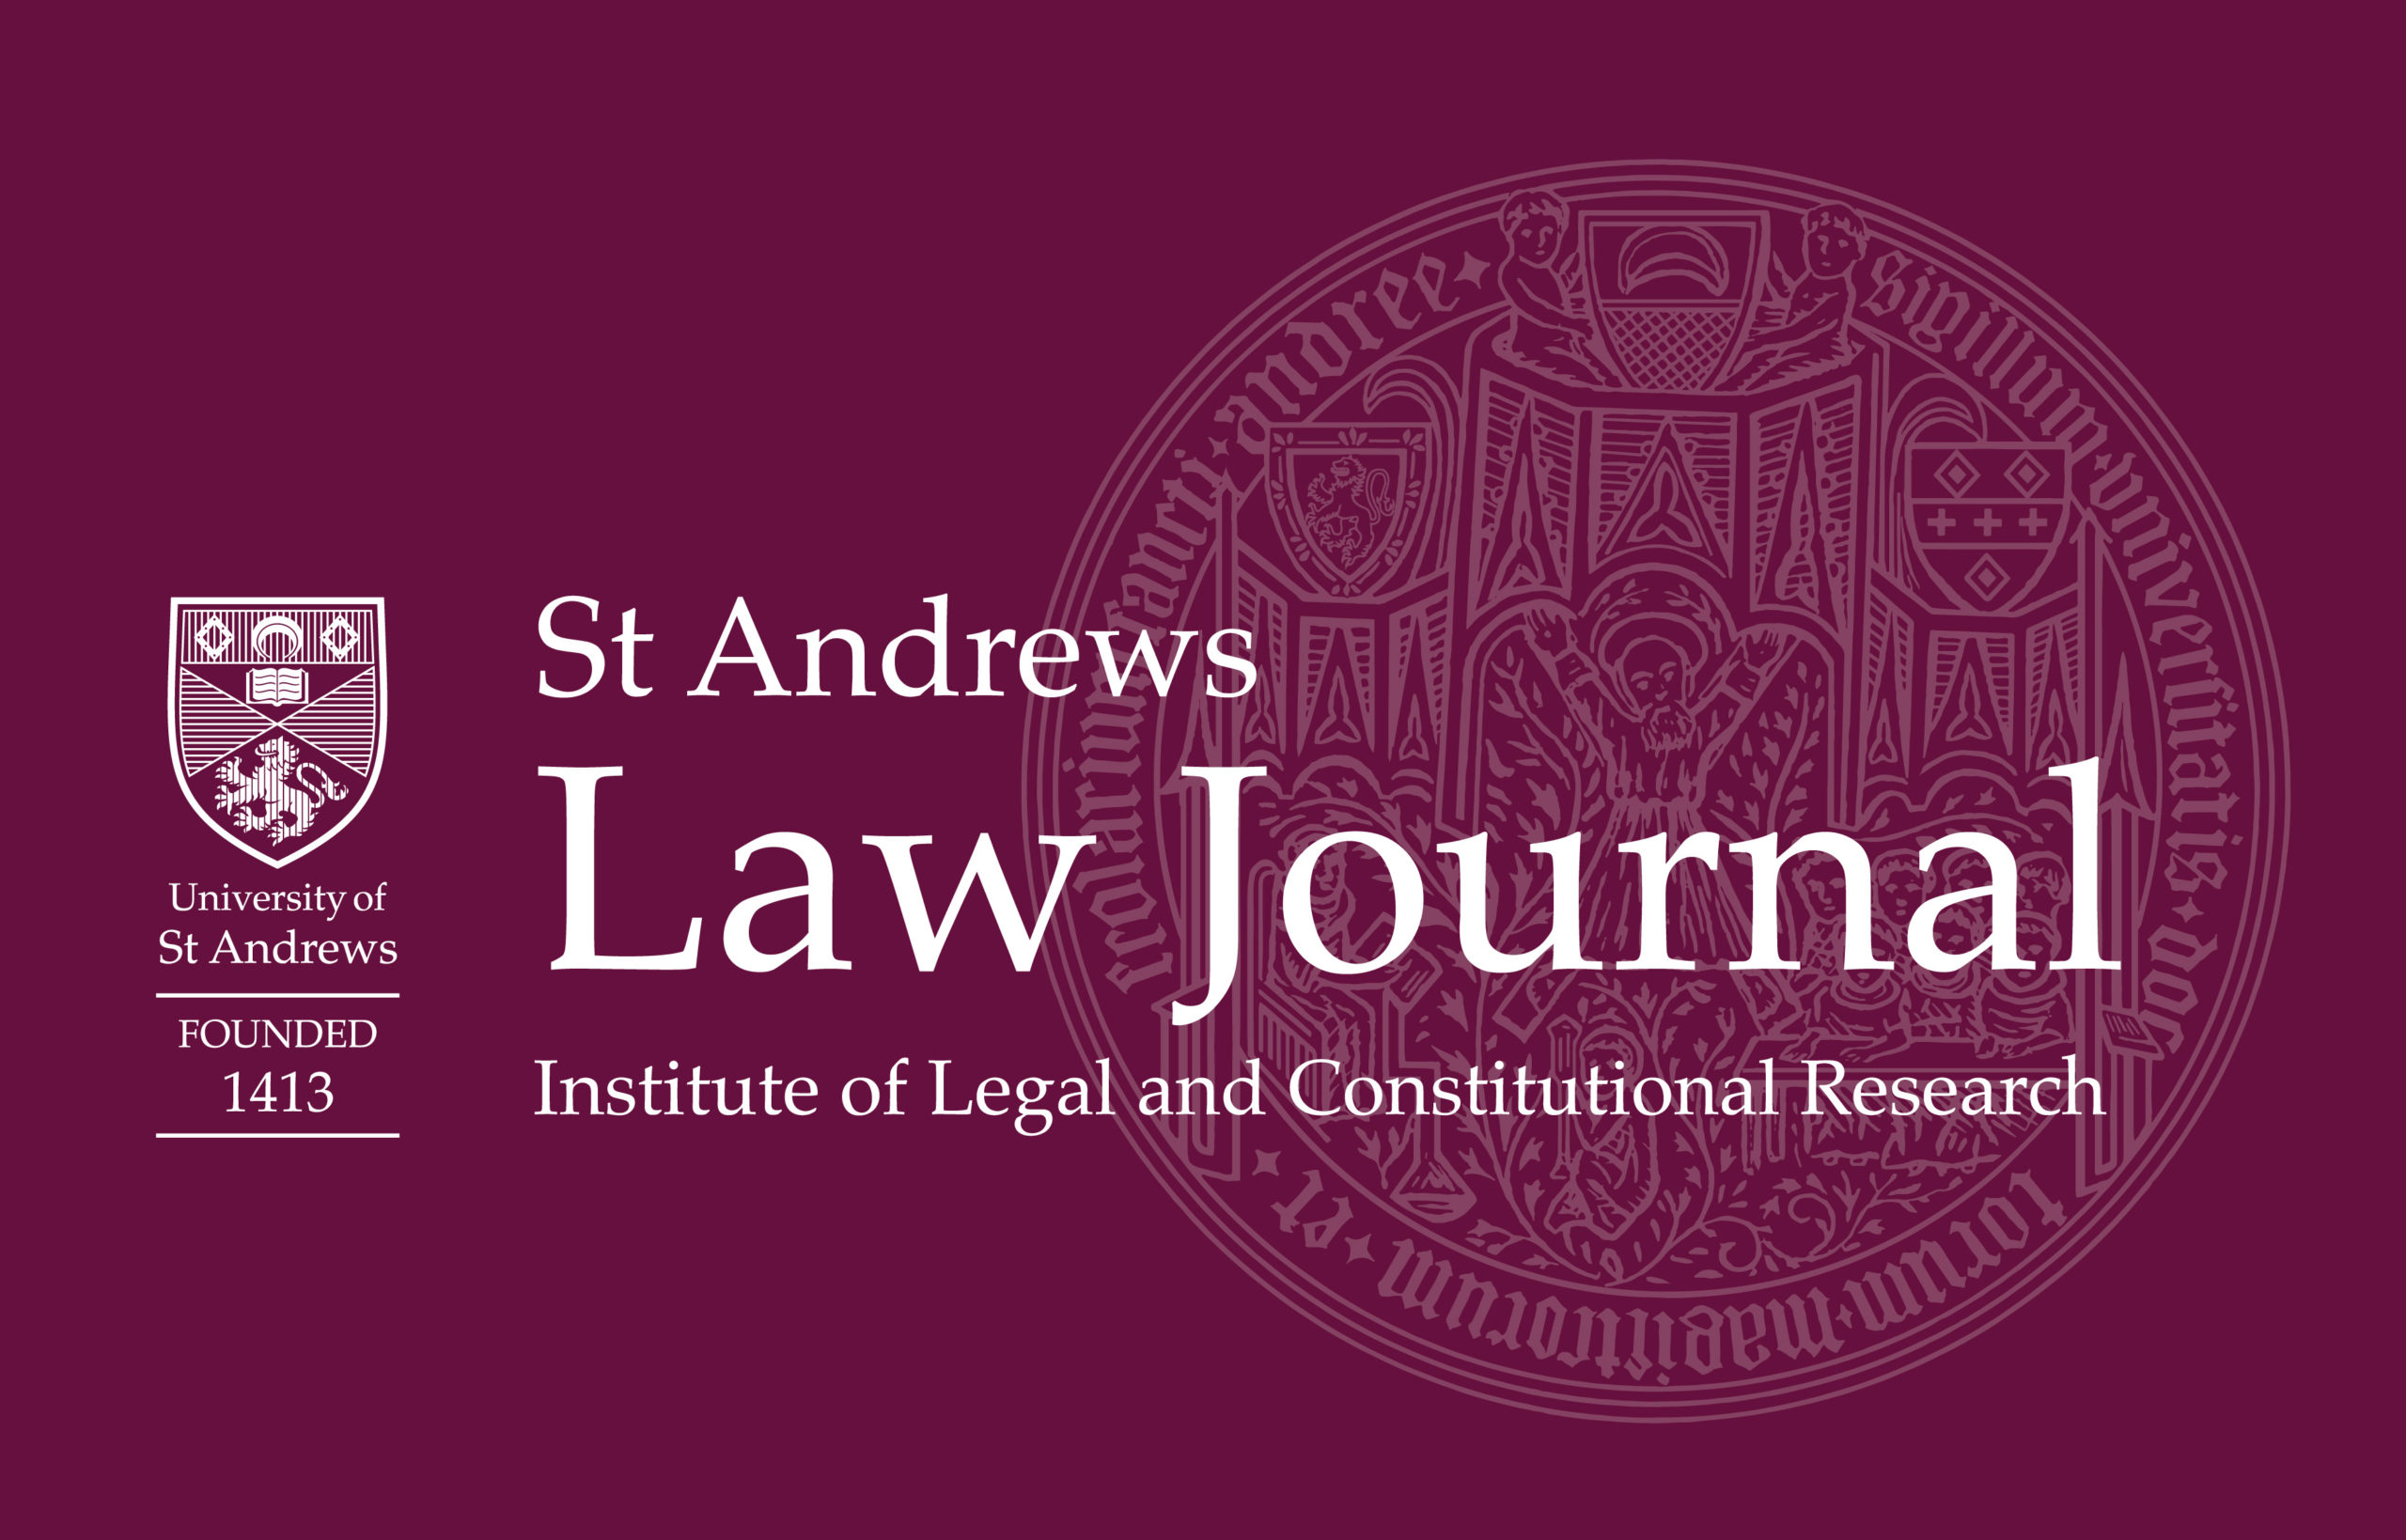 St Andrews Law Journal